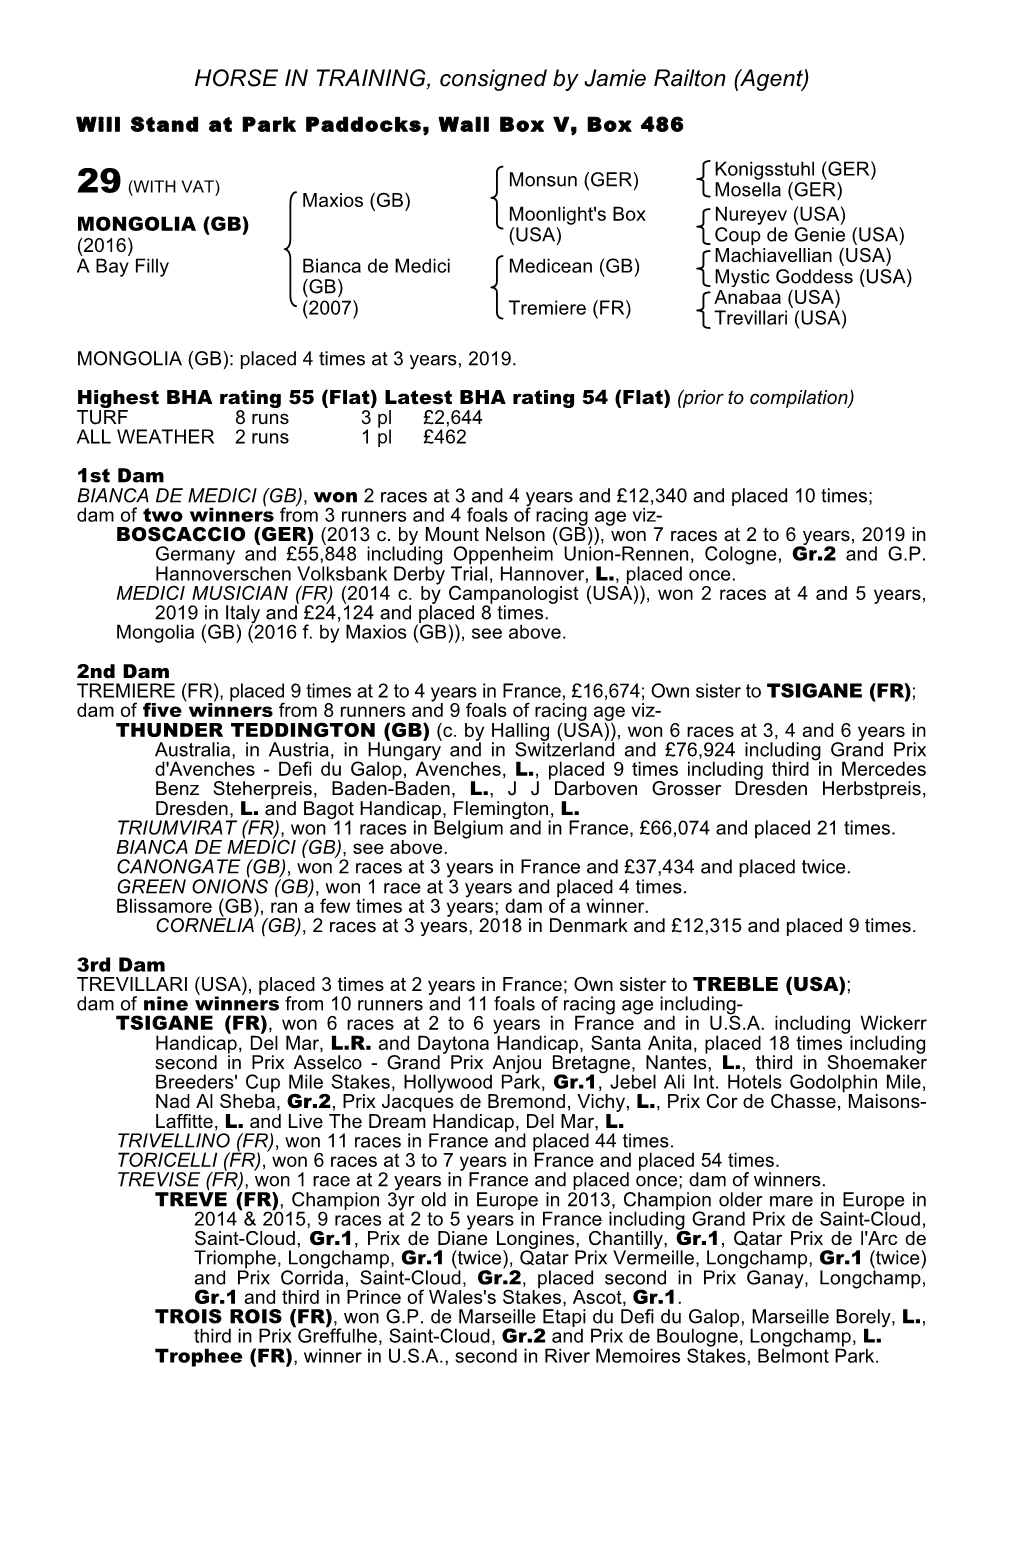 HORSE in TRAINING, Consigned by Jamie Railton (Agent)